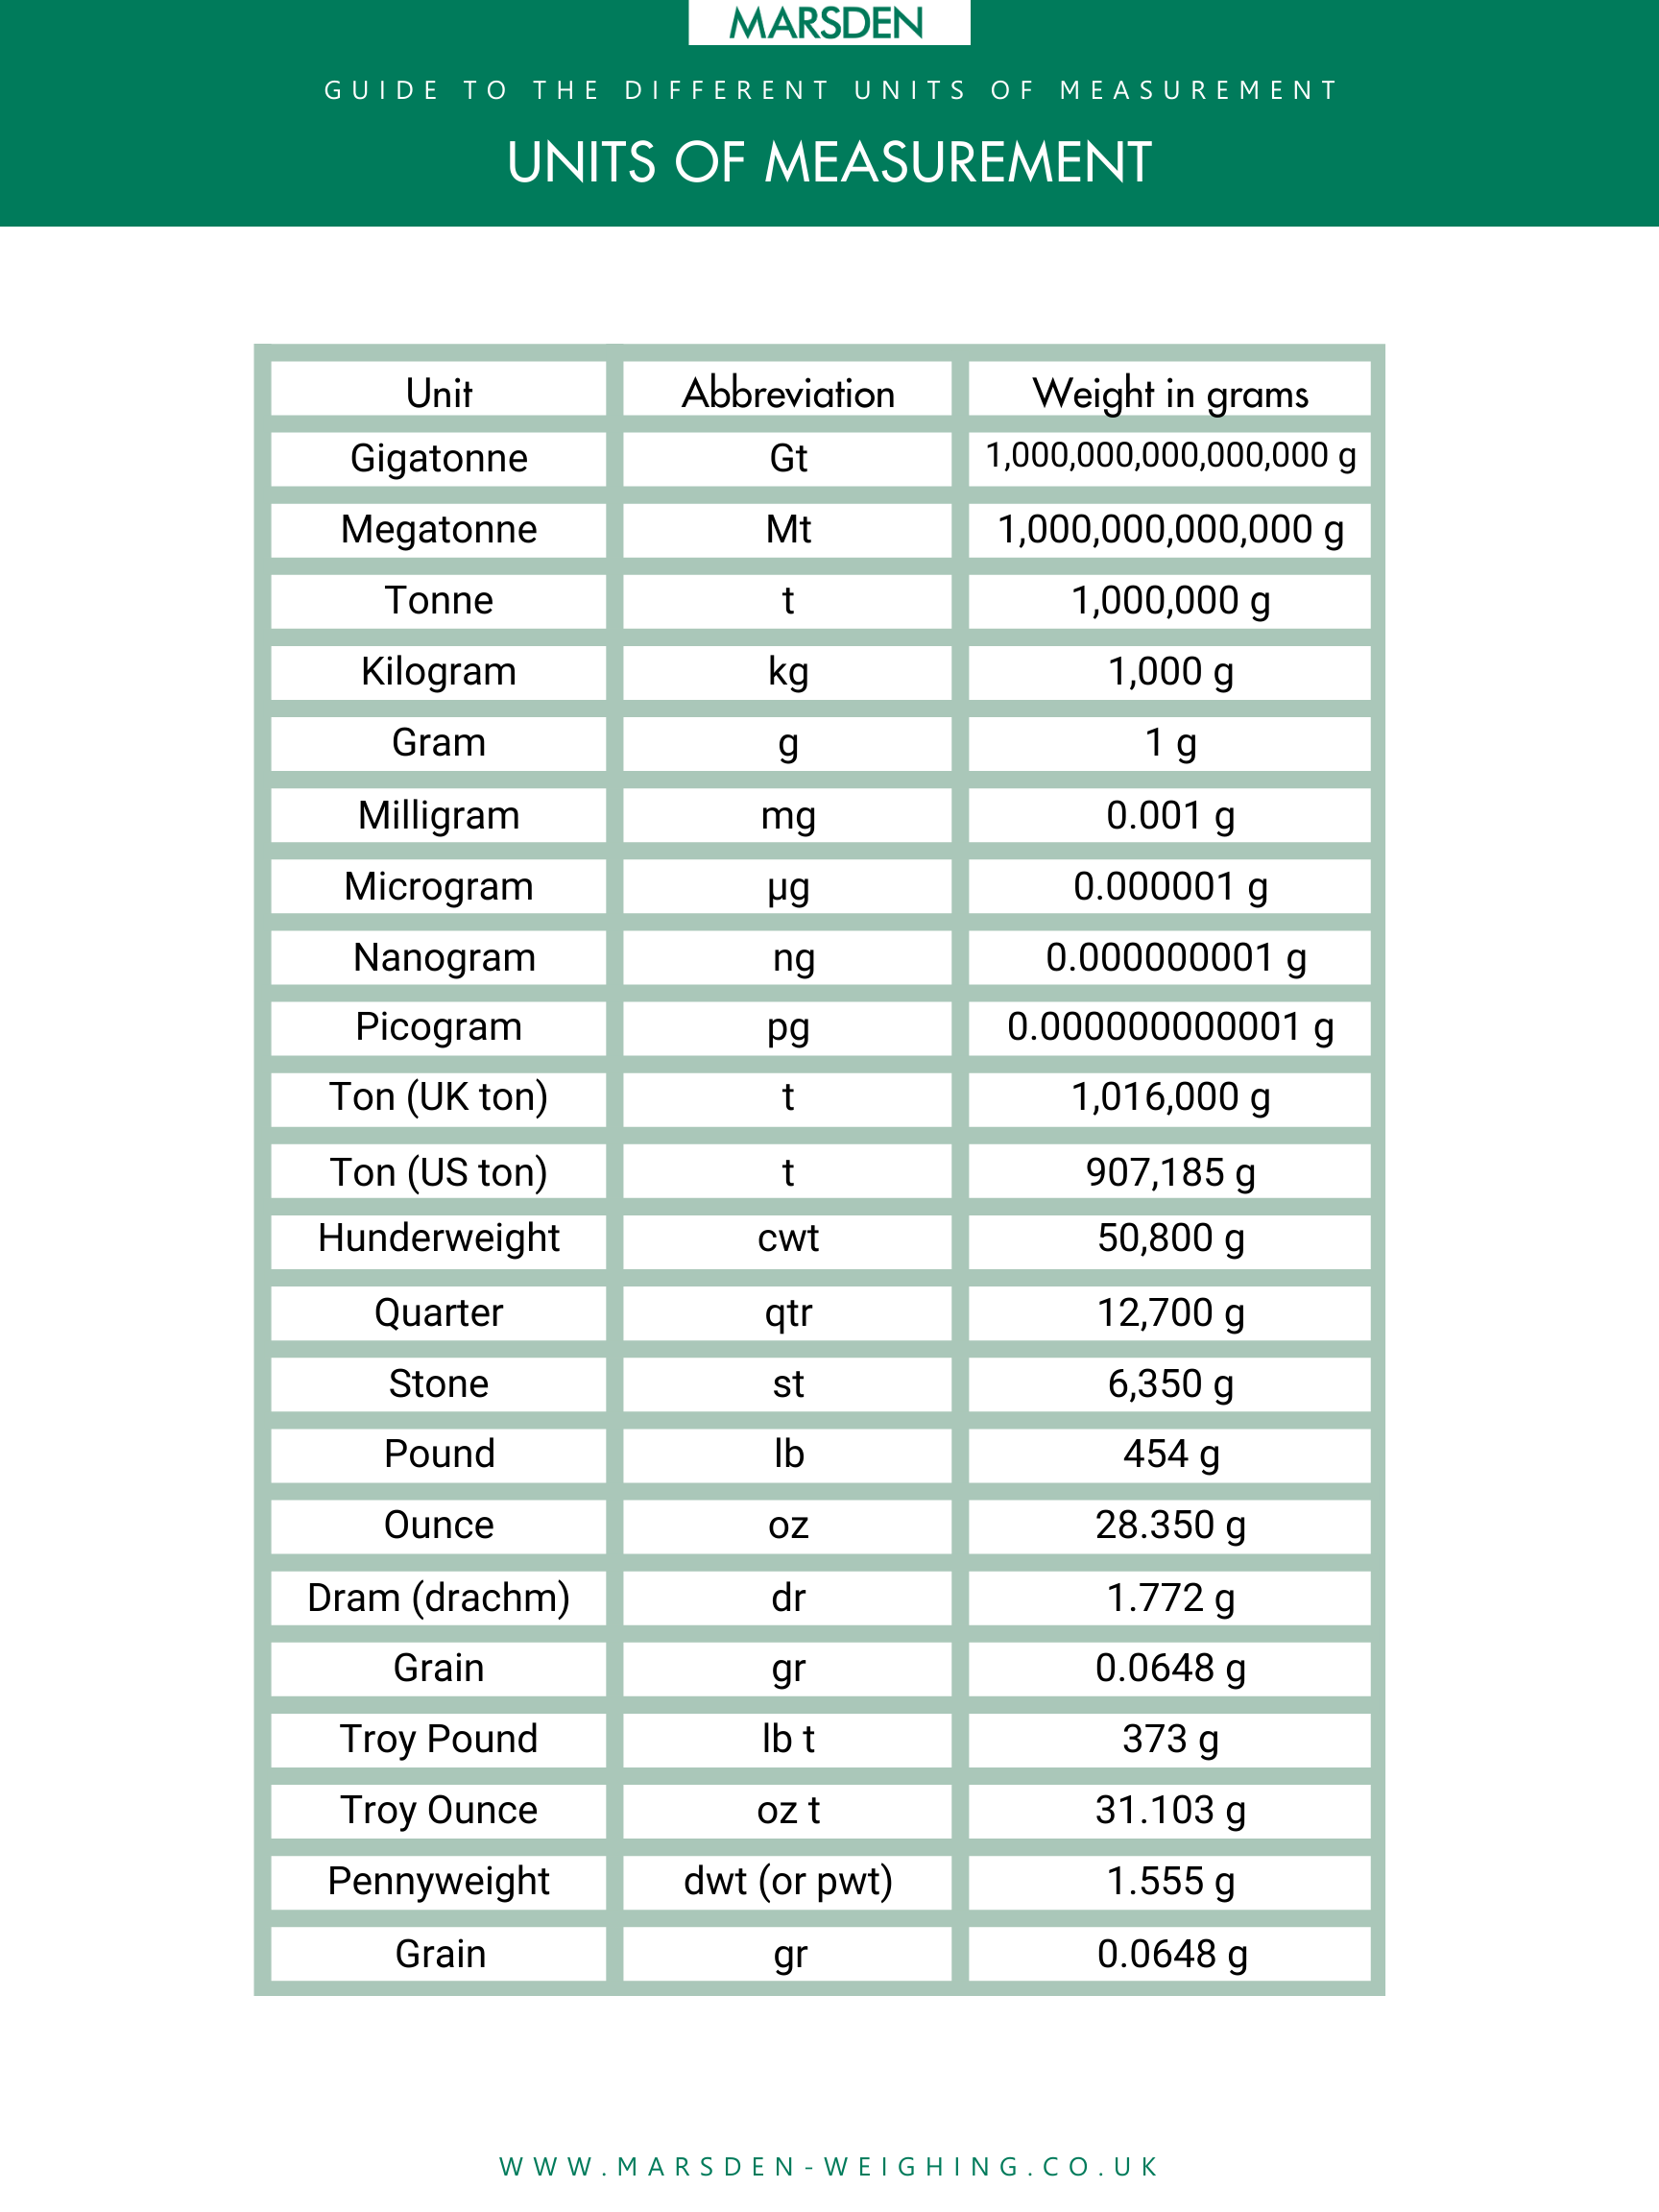 Units of Measurement Guide (Free Infographic) Marsden Weighing